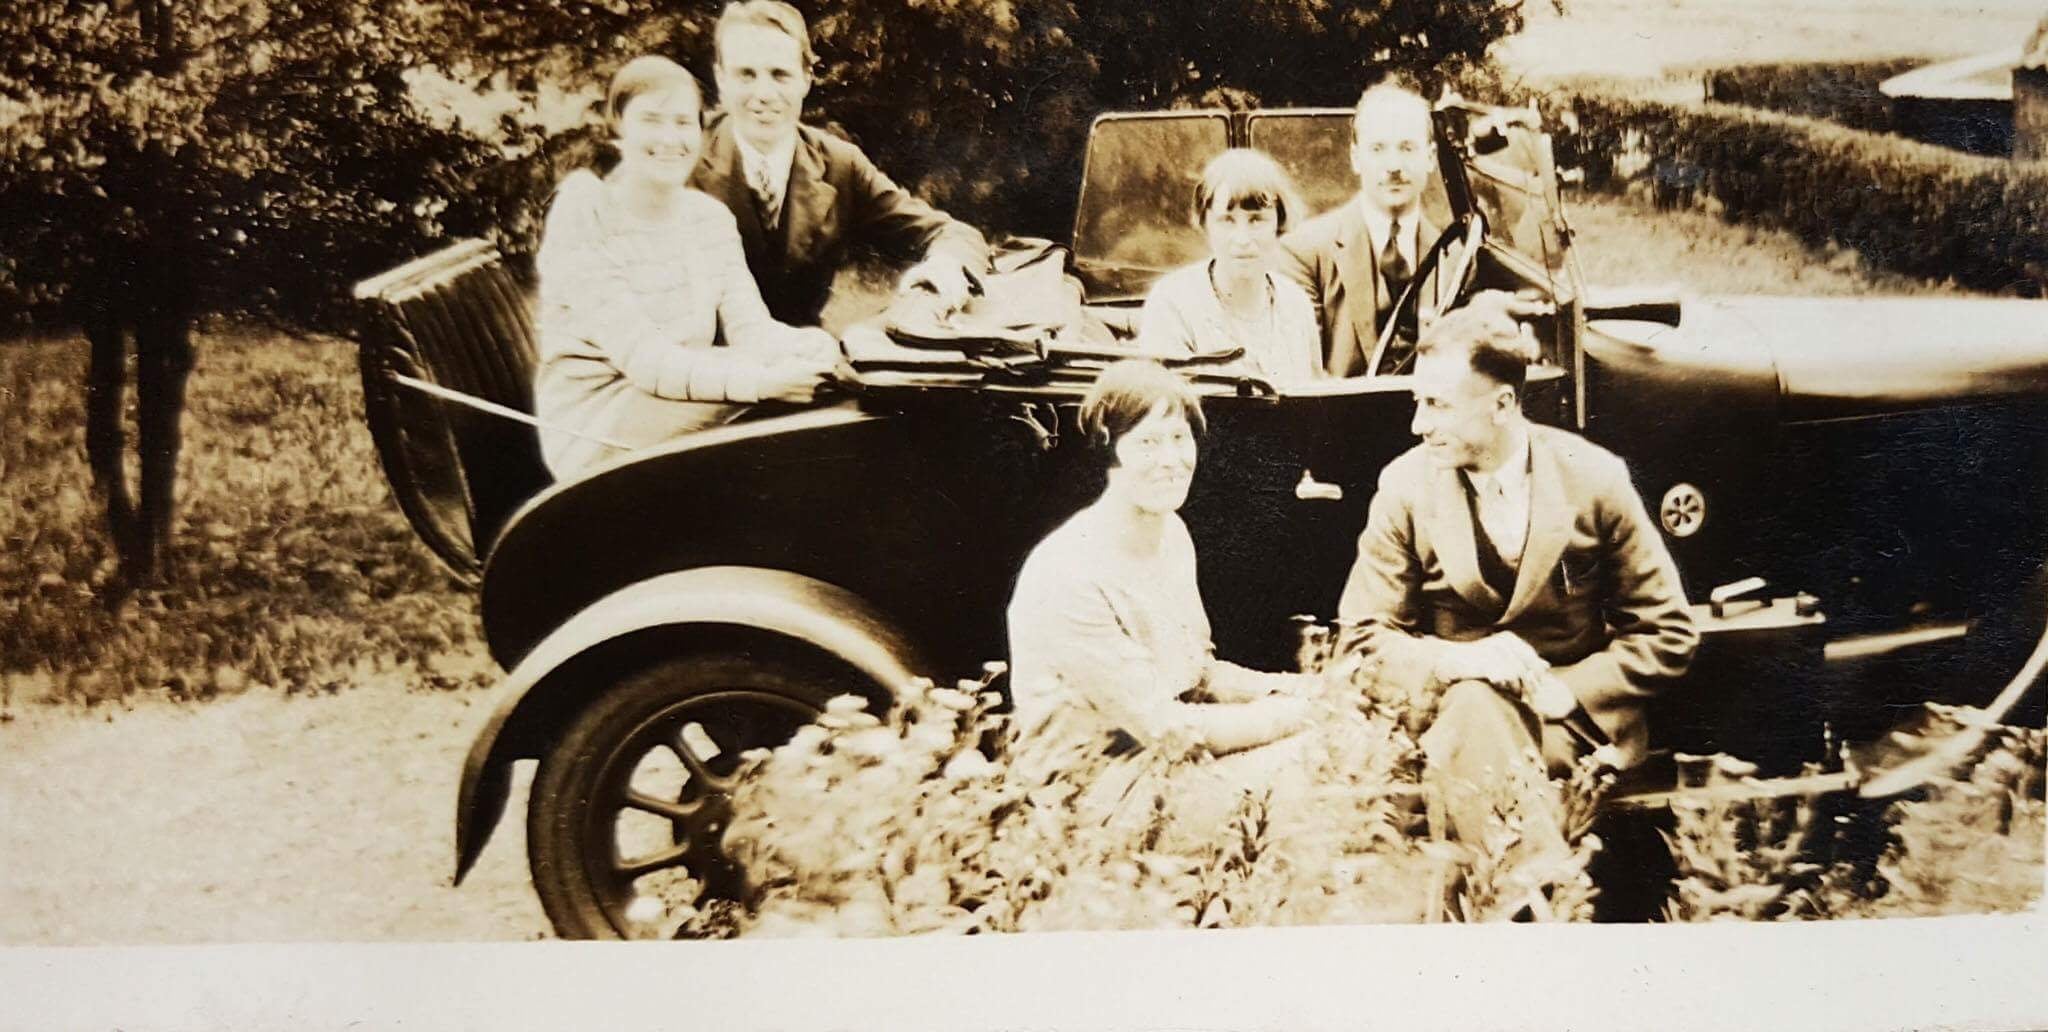 From left to right: Dorothy Palmer Mills (née Johnstone, great-aunt), Harry Raymond Mills (husband of Dorothy and great-uncle), Philippa Cowen (née Johnstone), Dr John Cowen (husband of Philippa and grandfather). In front of car: Marjorie Kingston McLean (née Johnstone, great-aunt) and John Stewart McLean (husband of Marjorie, great-uncle)